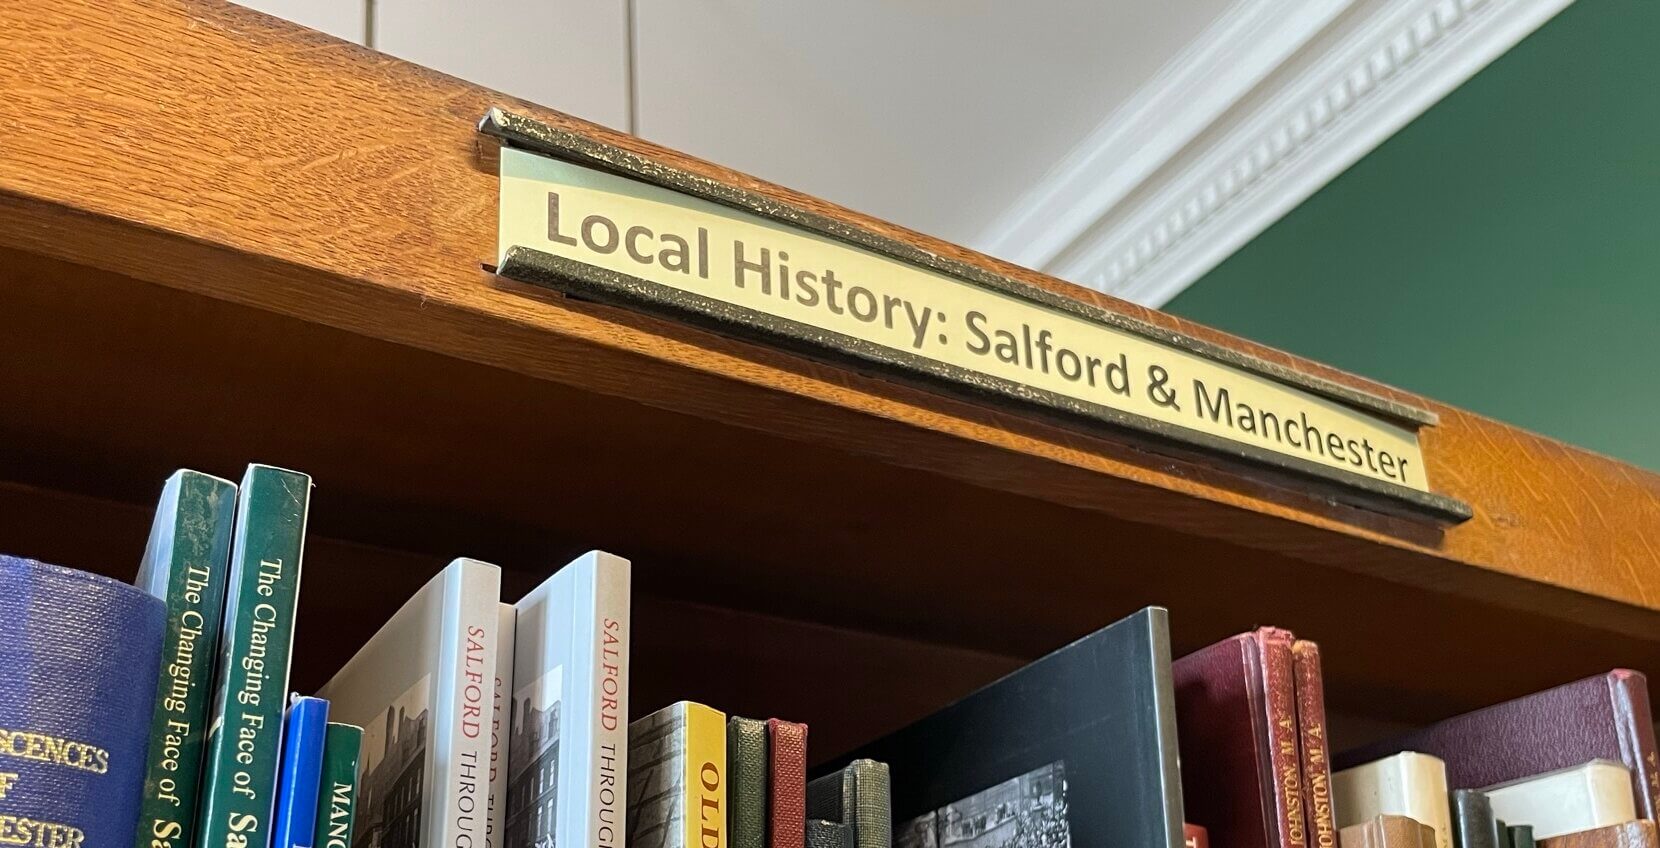 Local history books in the library.